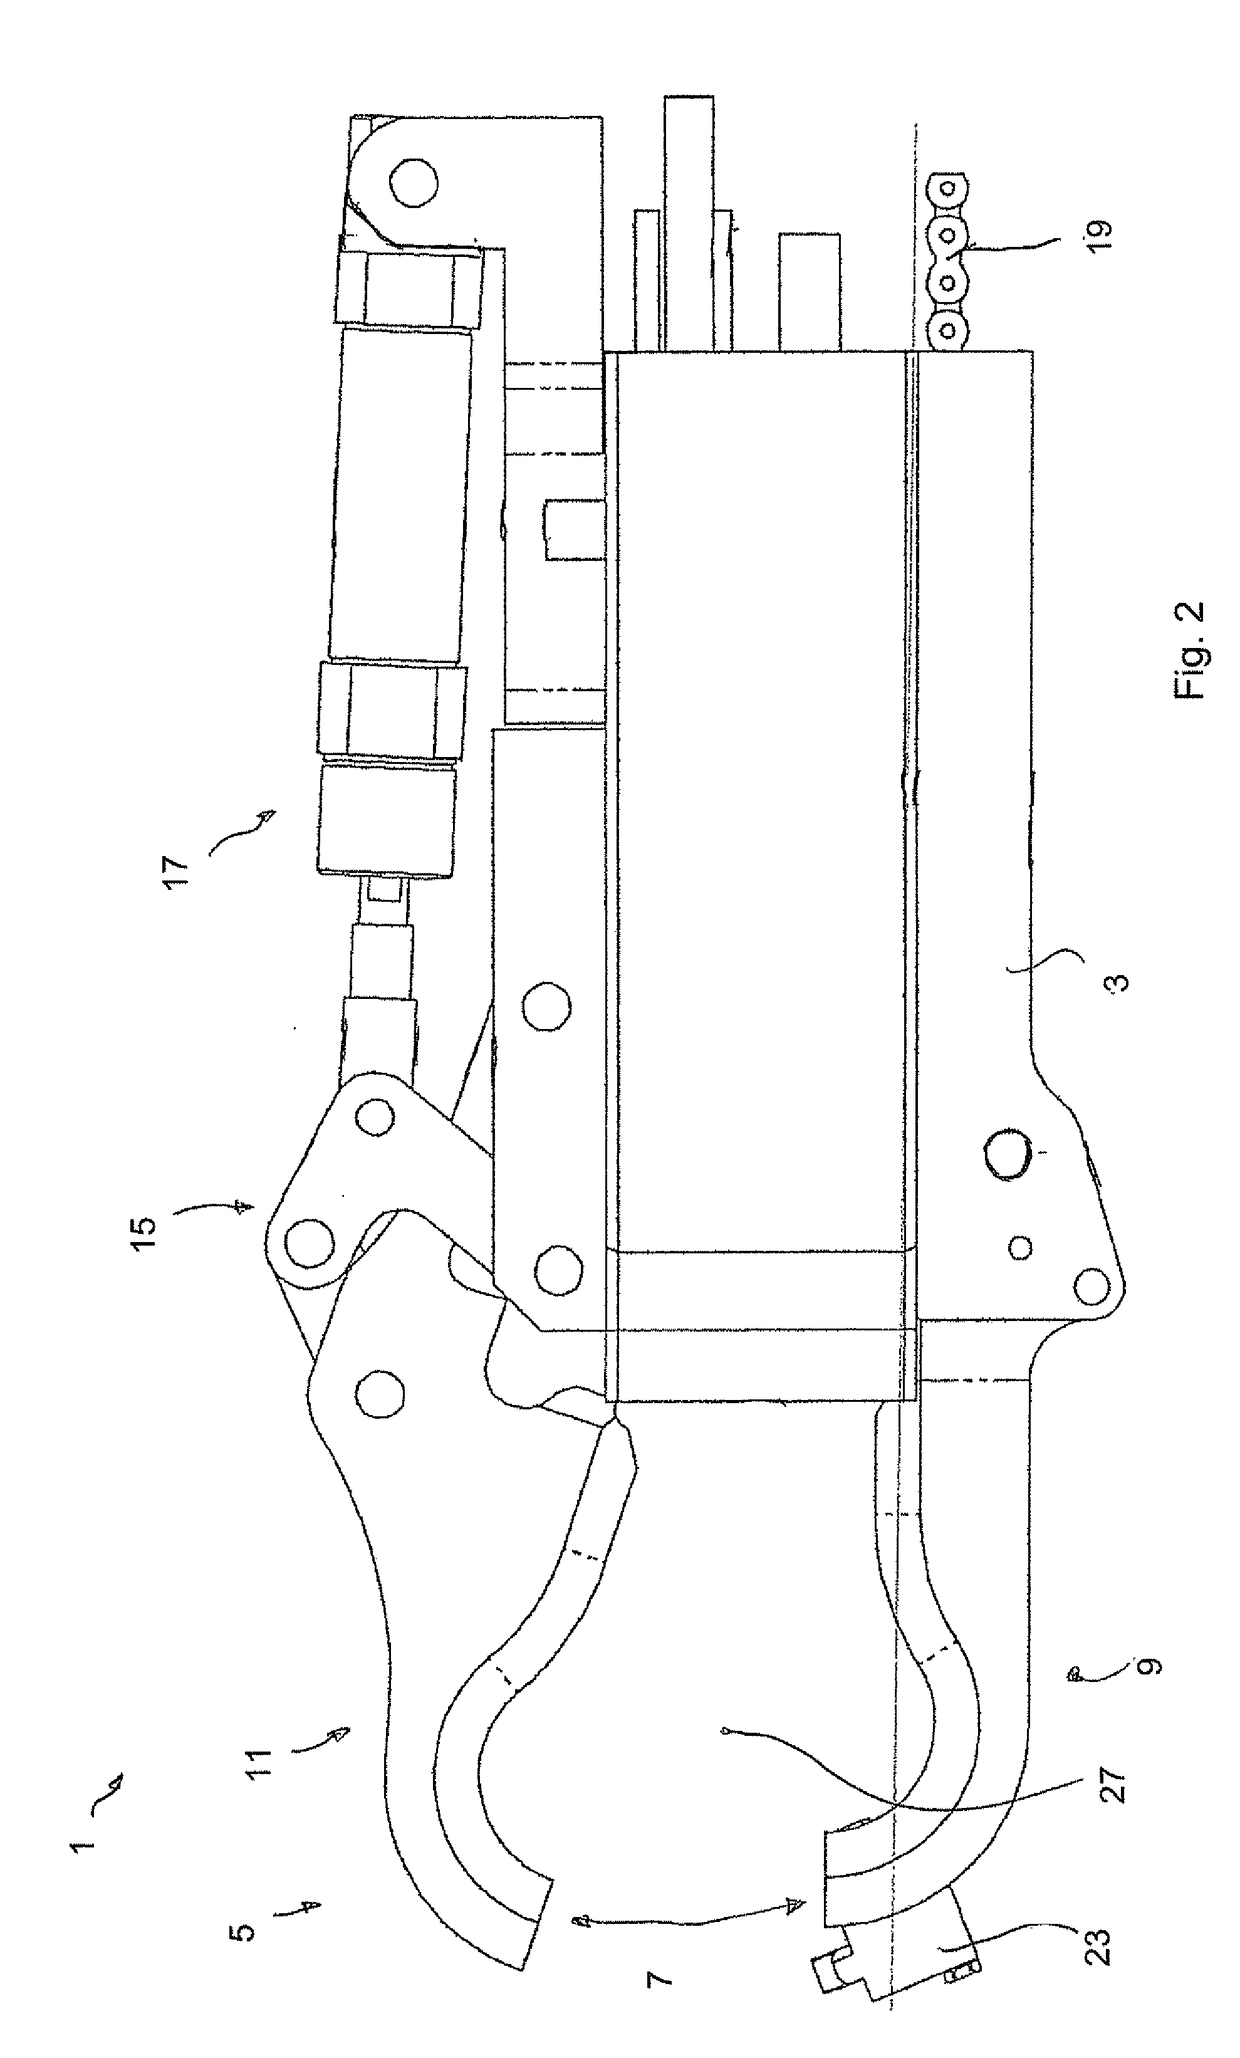 Device and method for automatically twisting metal wires, in particular for connecting adjacent, preferably mutually intersecting structure elements